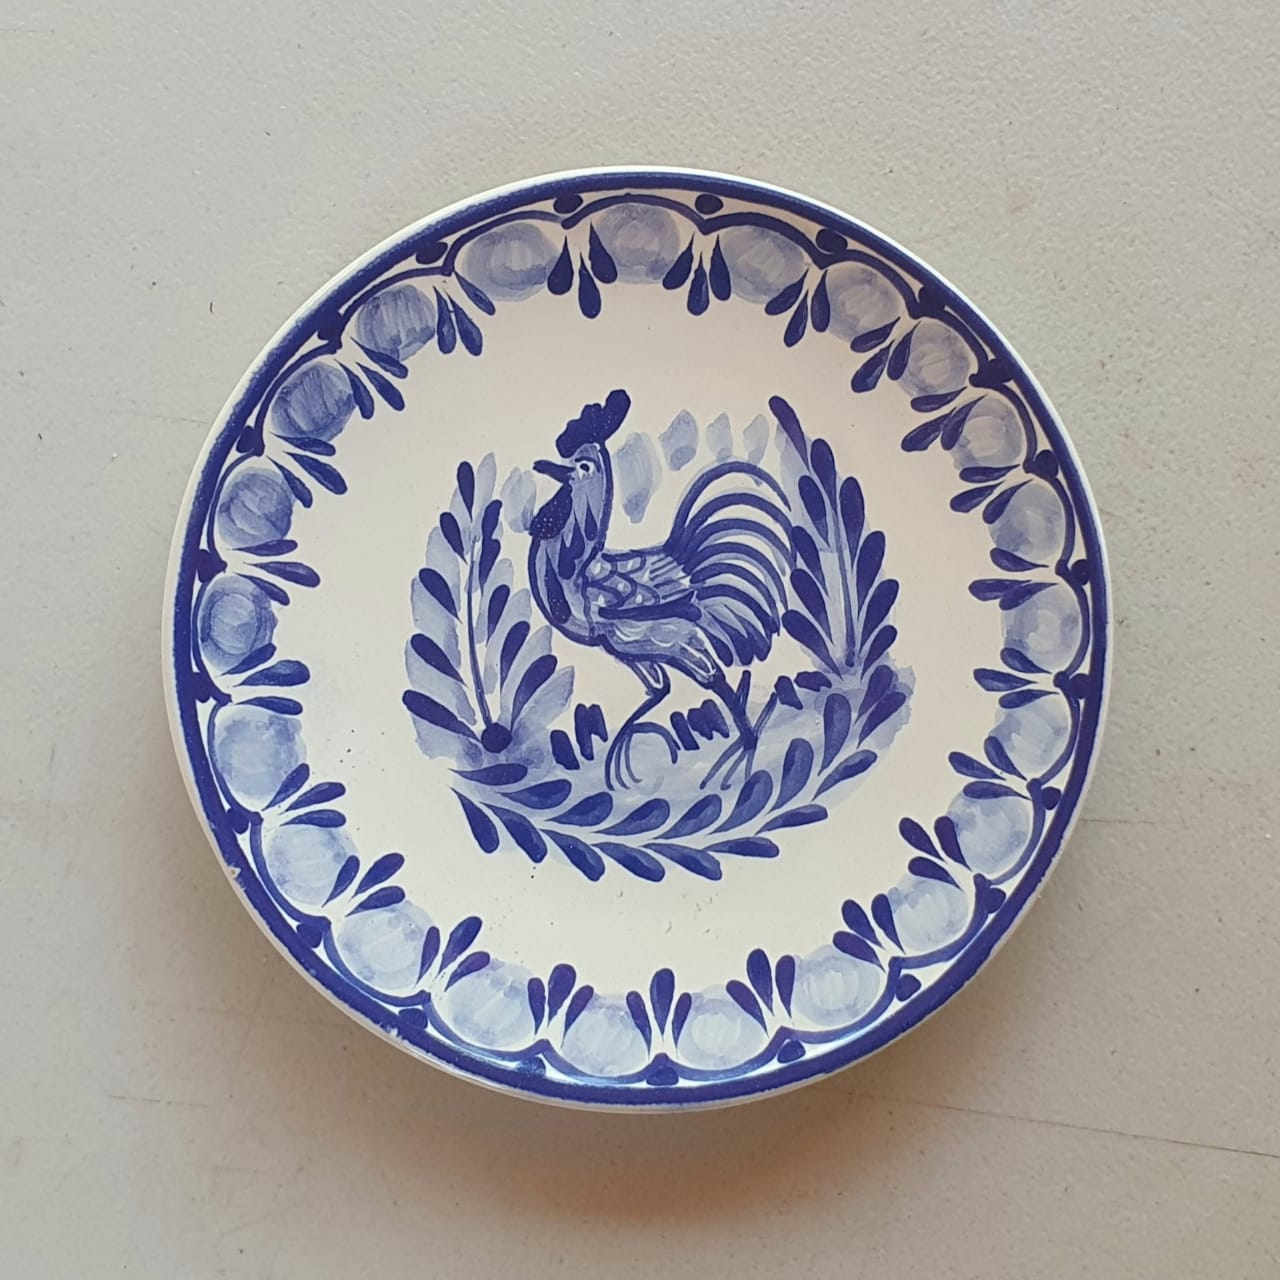 Rooster Bread Plate / Tapa Plate 6.3